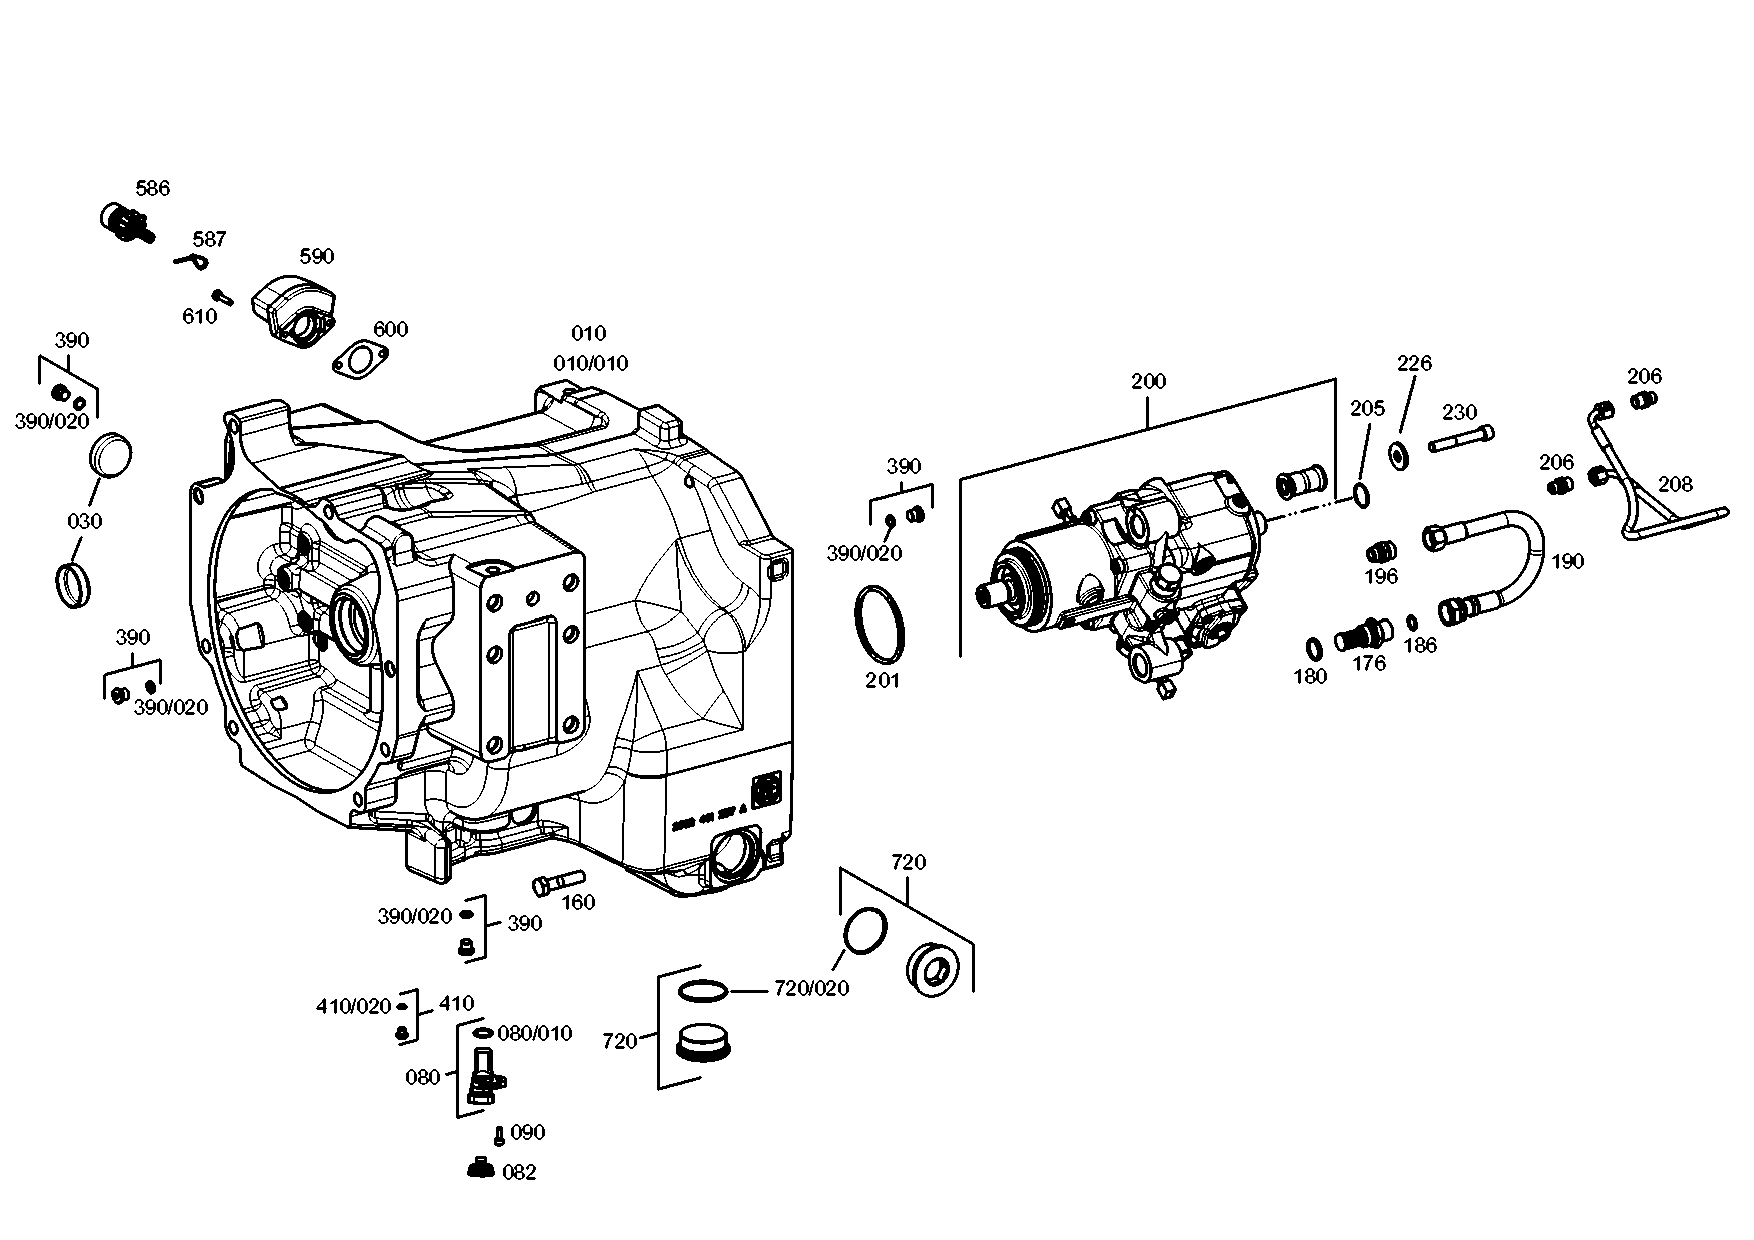 drawing for JLG INDUSTRIES, INC. 000,630,2221 - O-RING (figure 1)